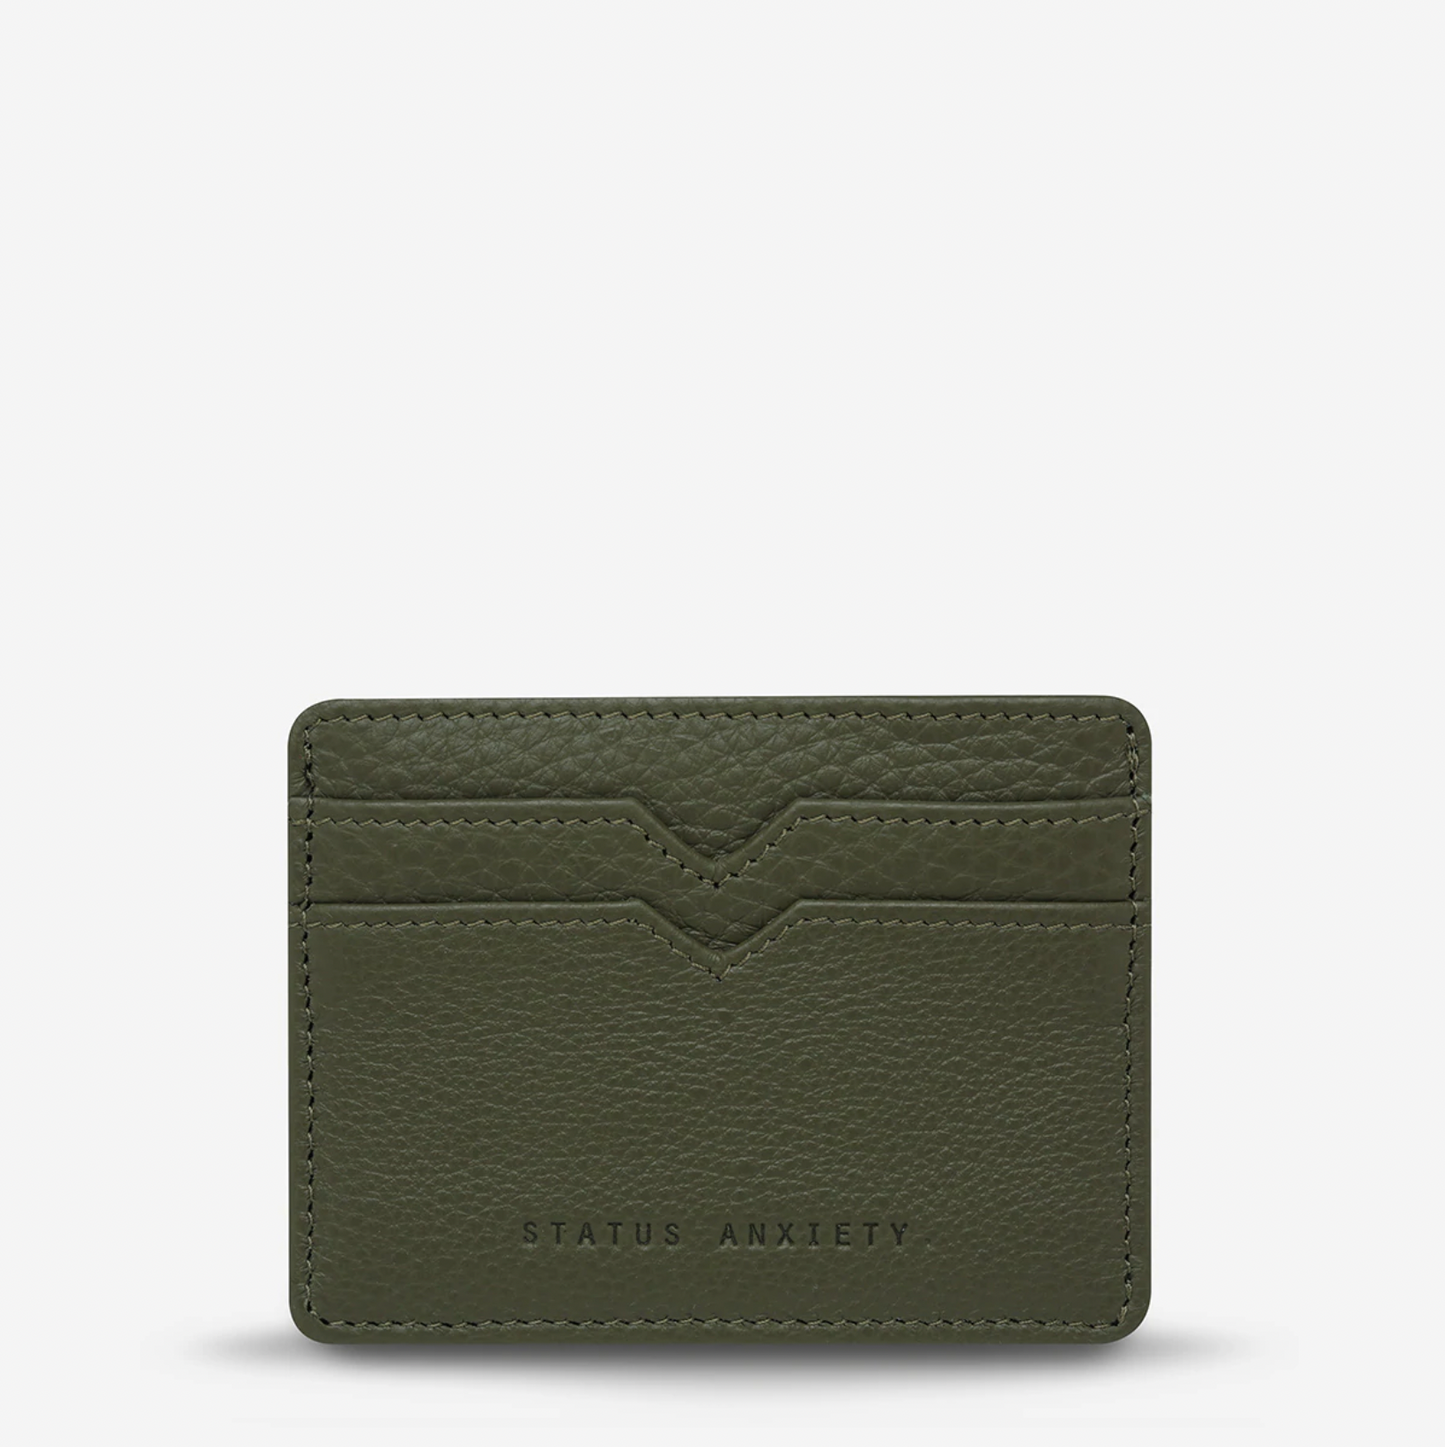 Status Anxiety Together For Now Wallet in Khaki